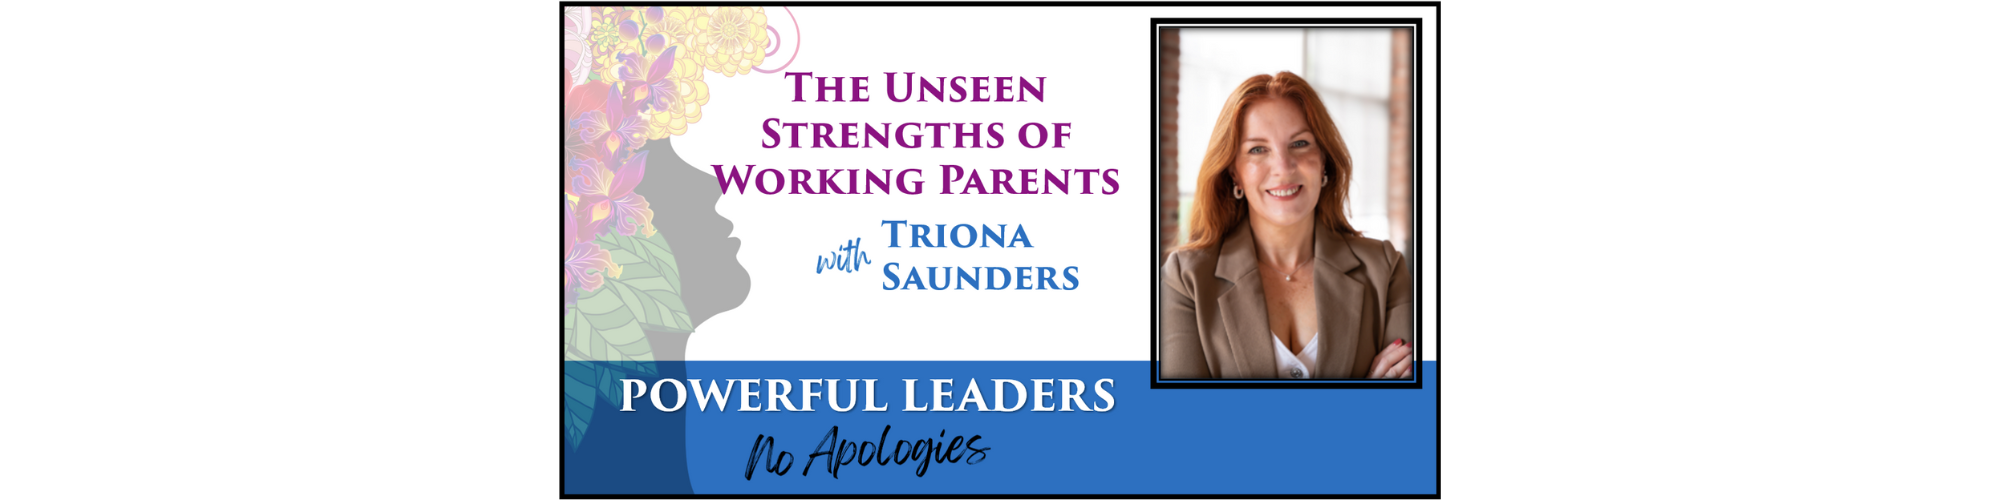 Powerful Leaders, No Apologies Episode 25 Podcast Banner